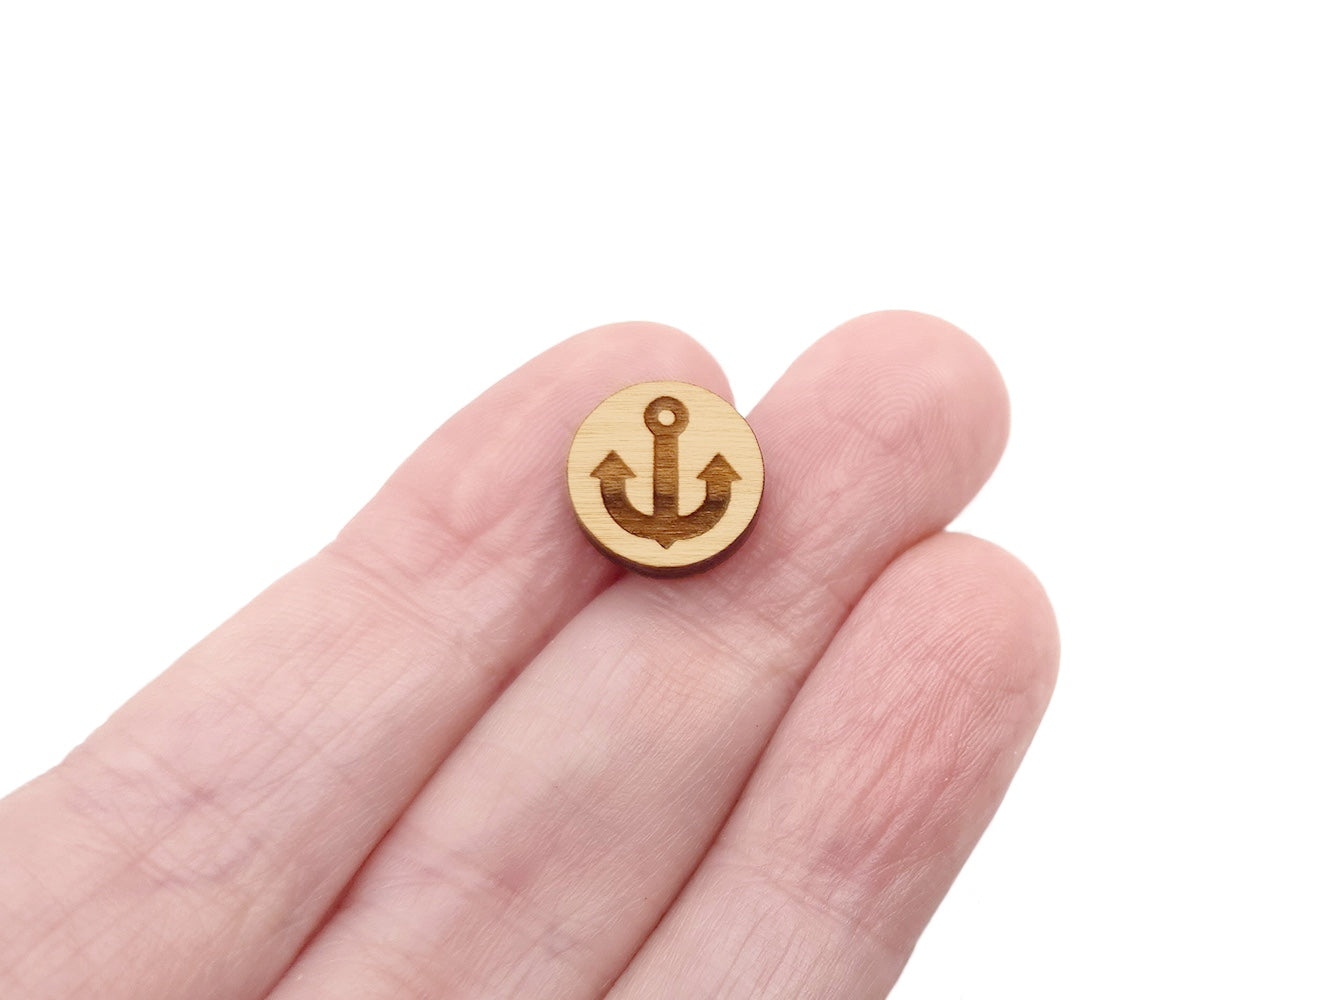 a hand holding a round wooden cabochon earring blank engraved with an anchor silhouette